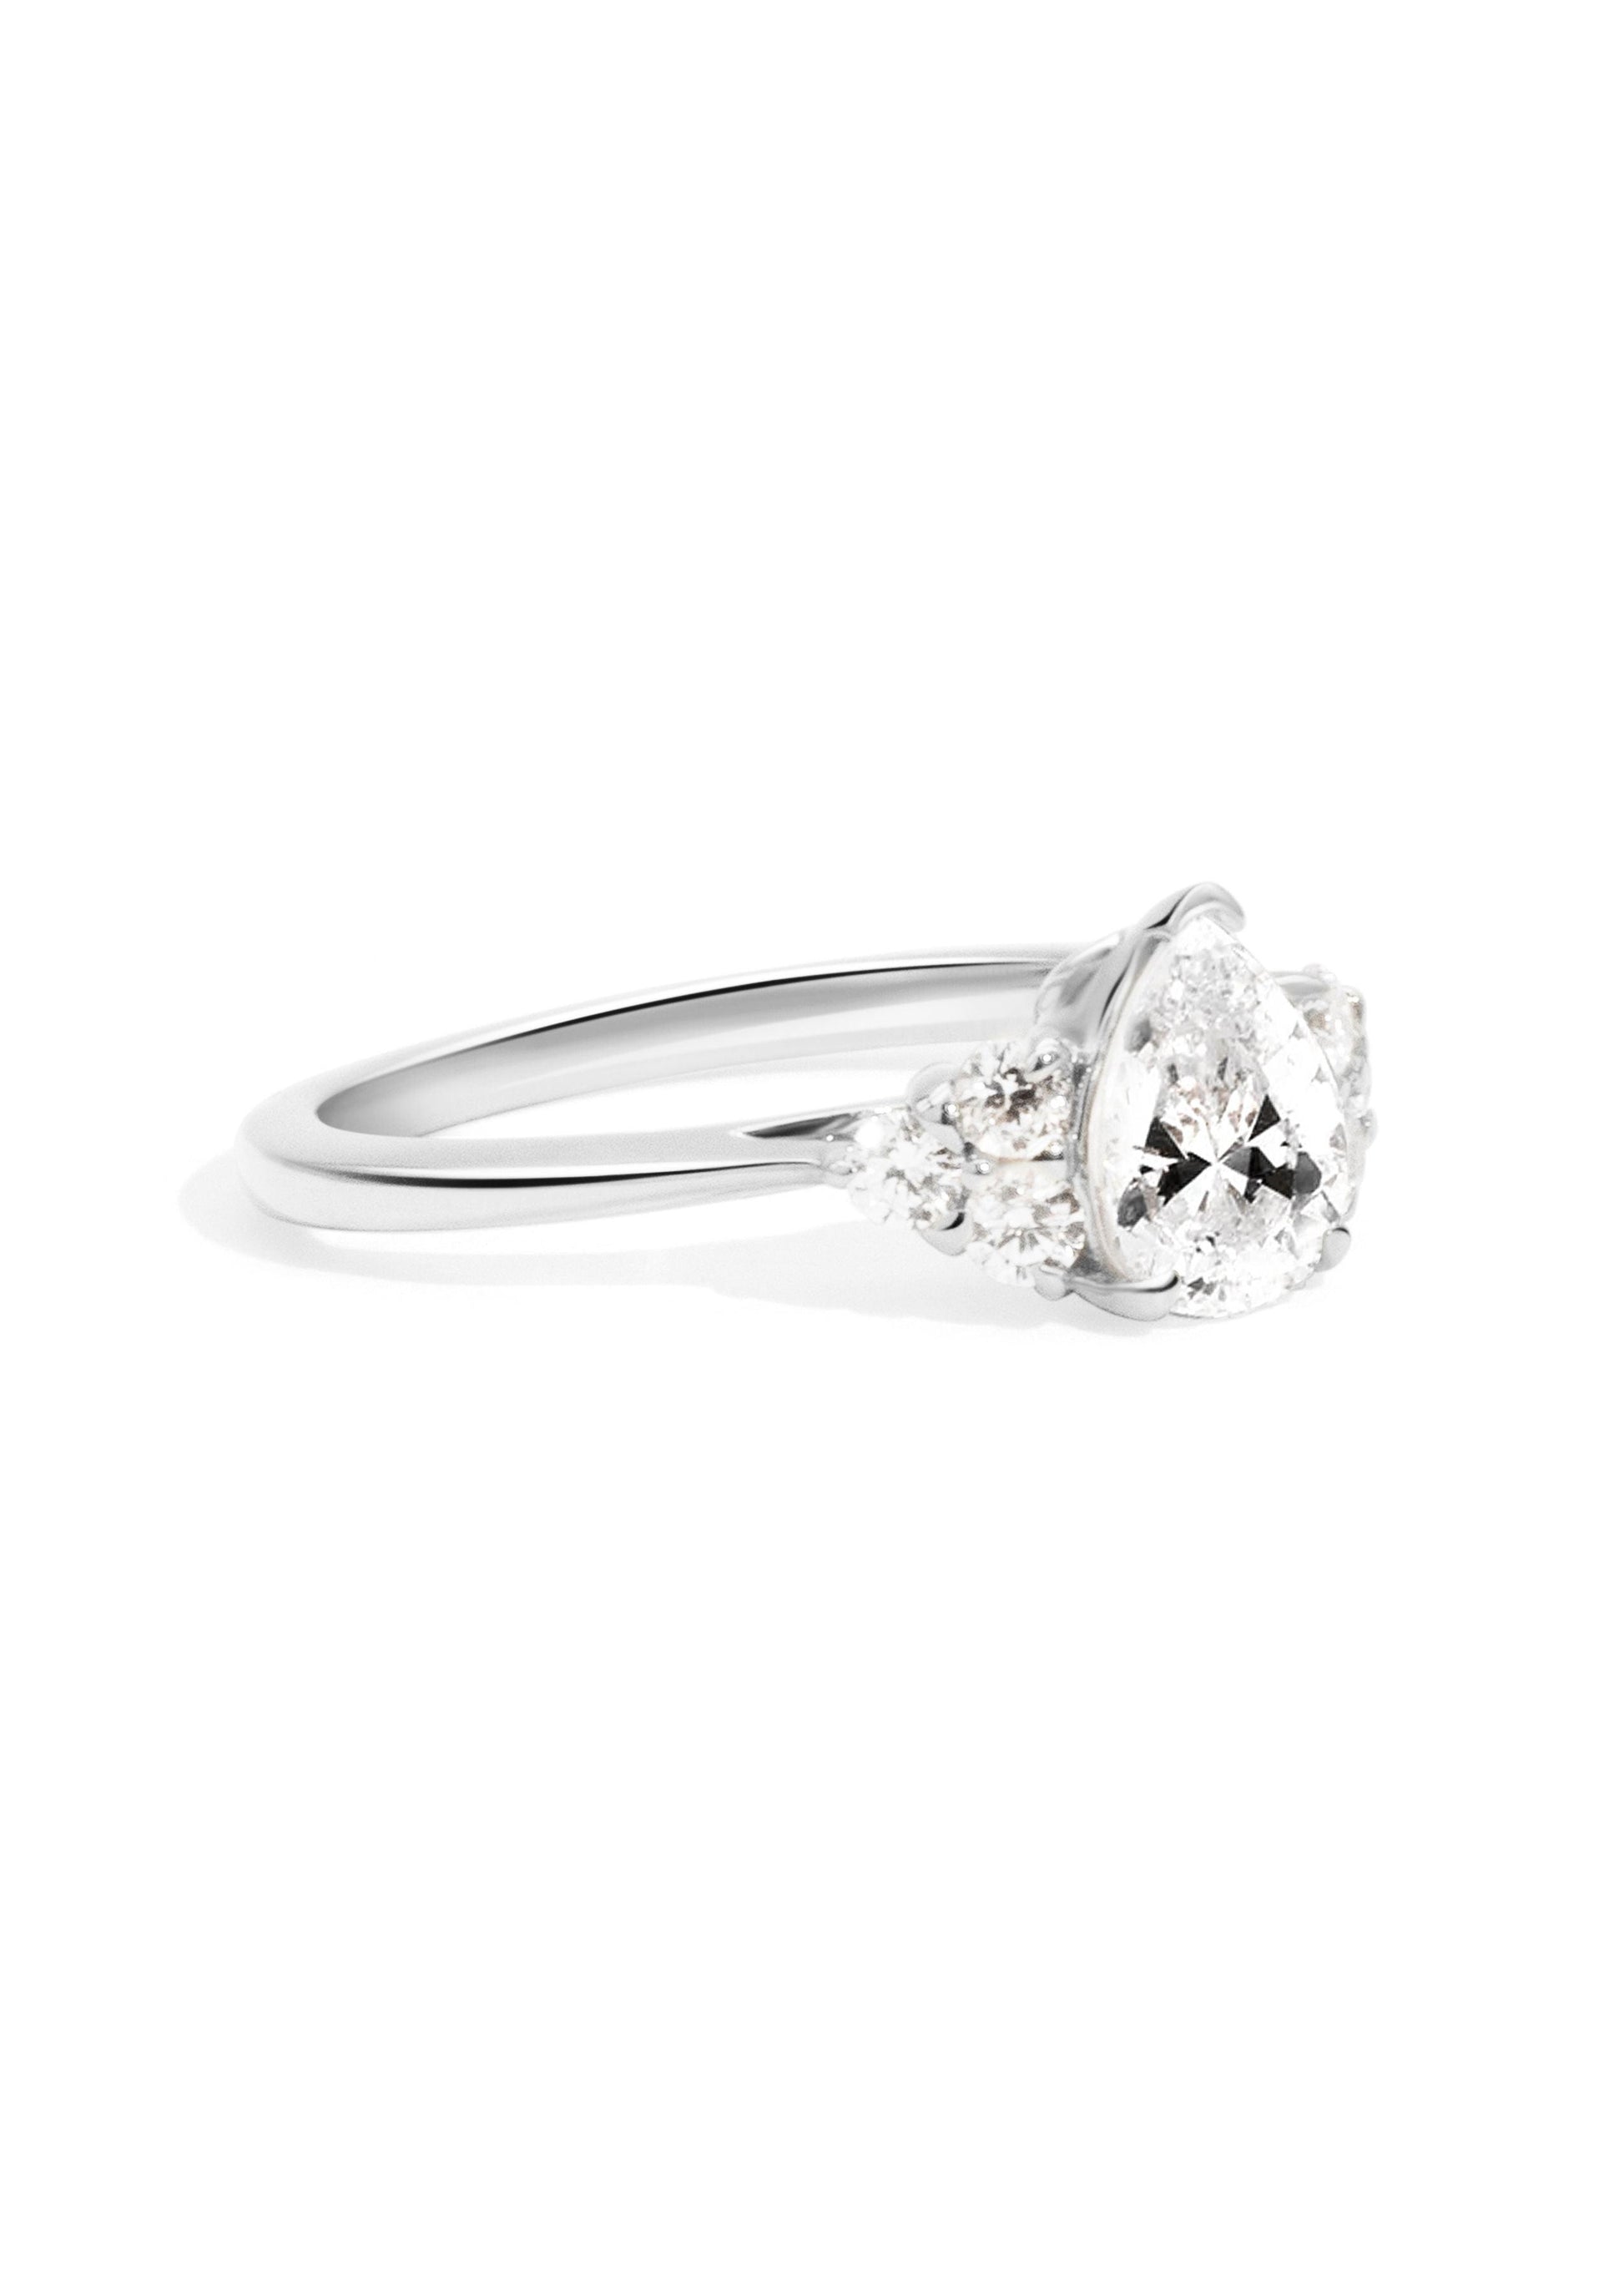 The Ivy White Gold Cultured Diamond Ring - Molten Store